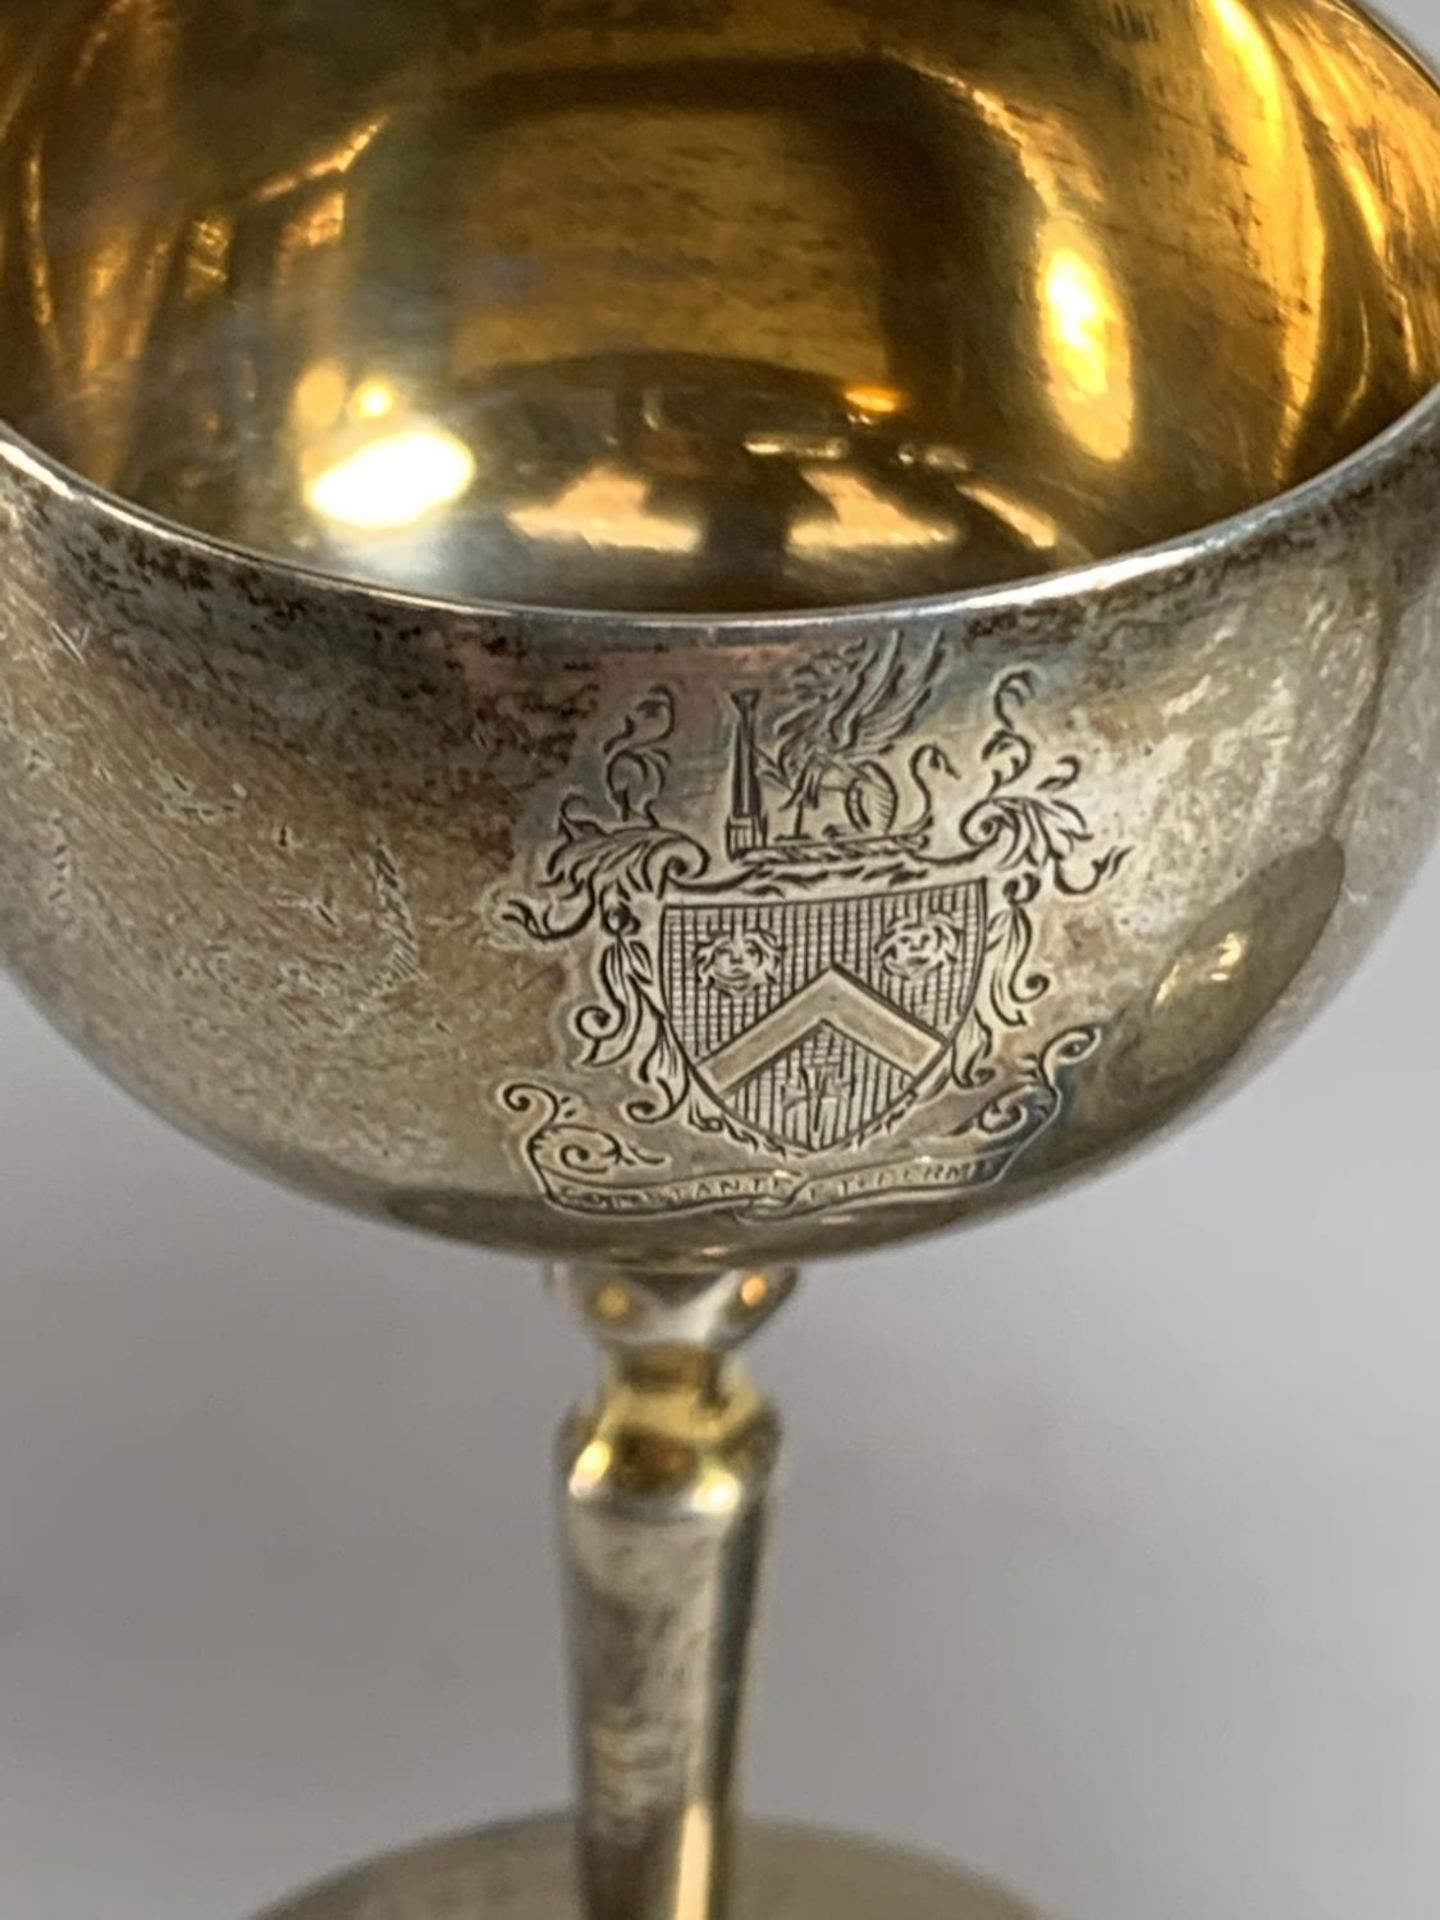 TWO HALLMARKED SILVER TROPHIES ON WOODEN BASES GROSS WEIGHT 160 GRAMS (81 GRAMS WITHOUT THE BASES) - Image 2 of 4